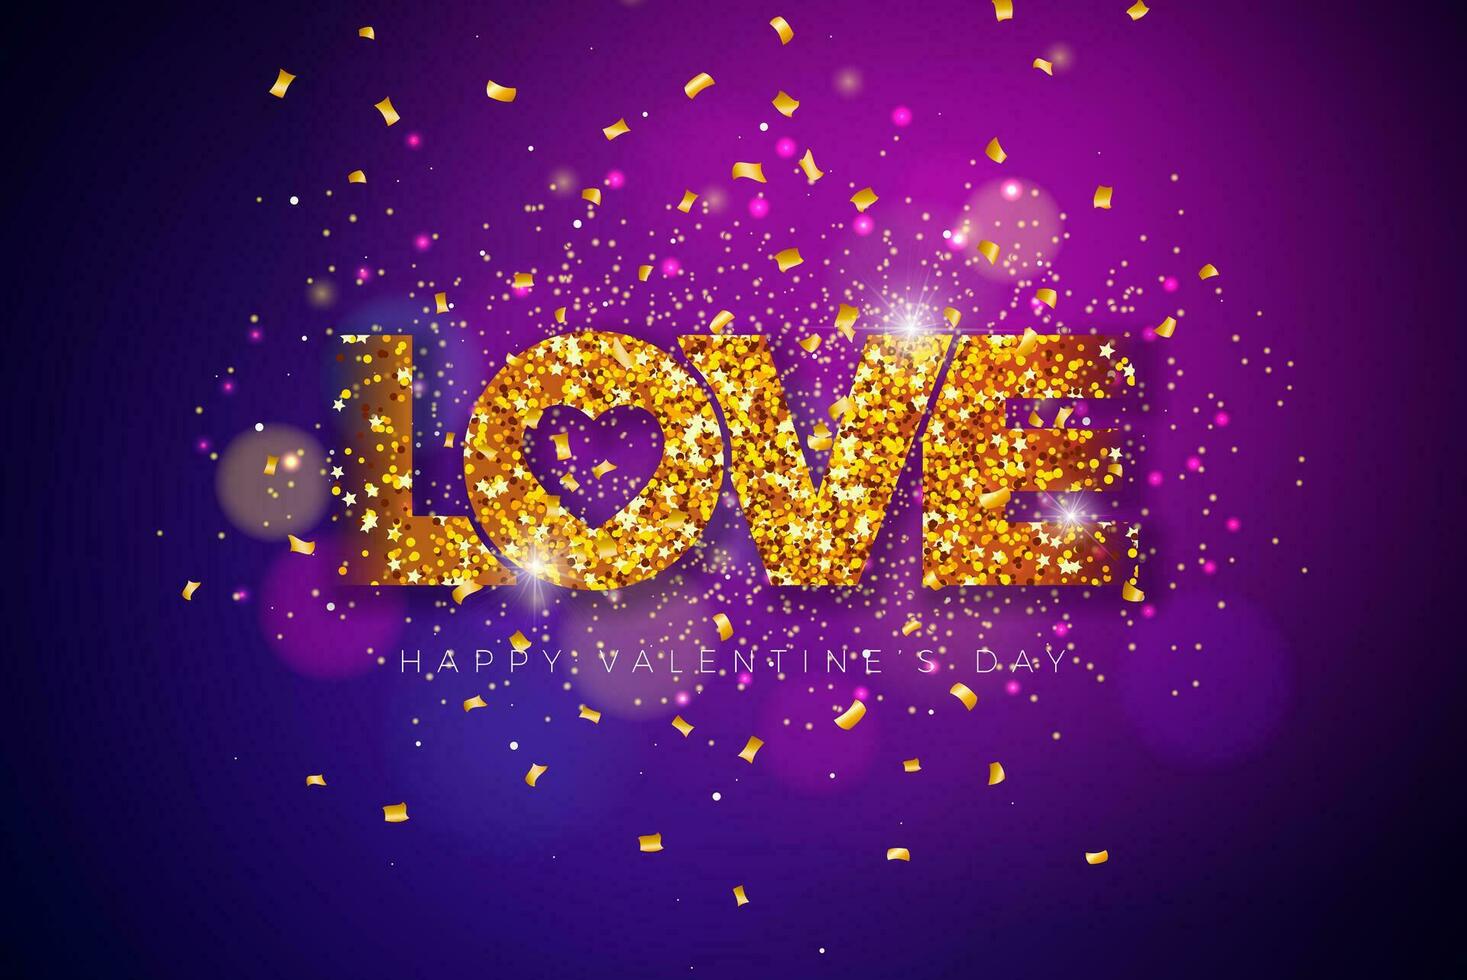 Happy Valentines Day Design with Gold Glittered Love Typography Letter and Falling Confetti on Dark Violet Background. Vector Wedding and Romantic Valentine Theme Illustration for Flyer, Greeting Card